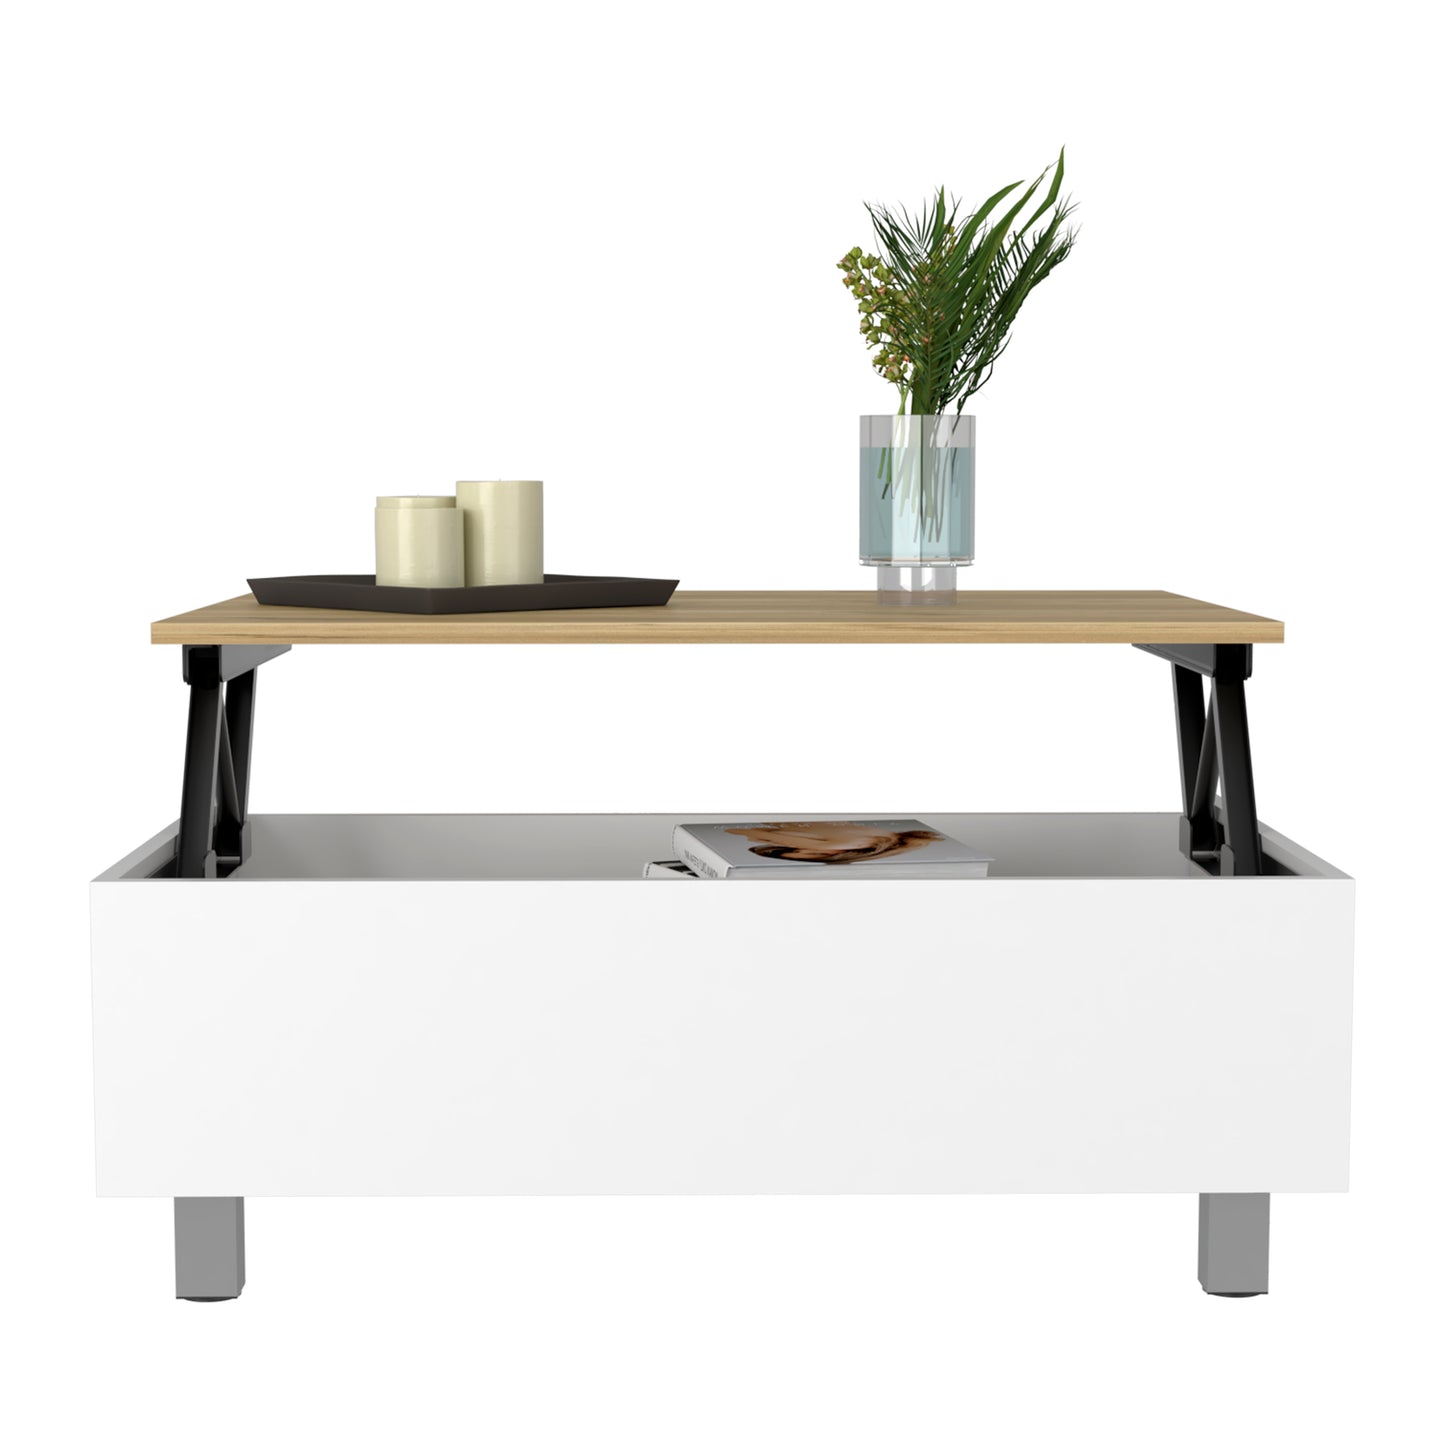 Elegant Lift Top Coffee Table in White and Light Oak with Four Legs